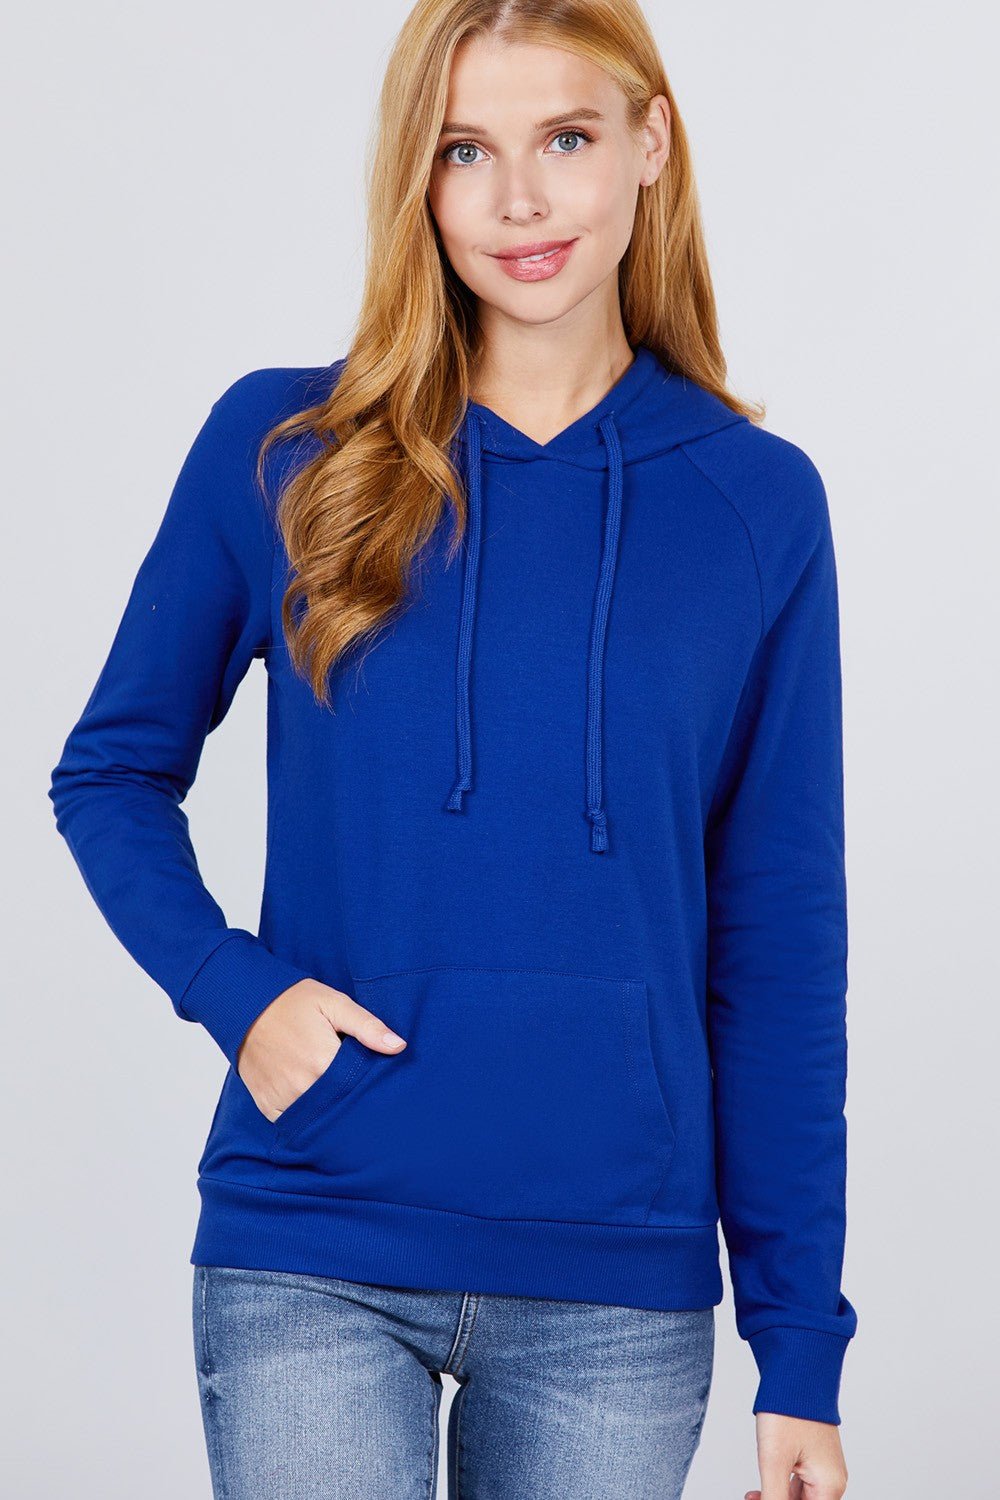 Moesha Felicia Cotton Blend French Terry Pullover Hoodie (Royal)